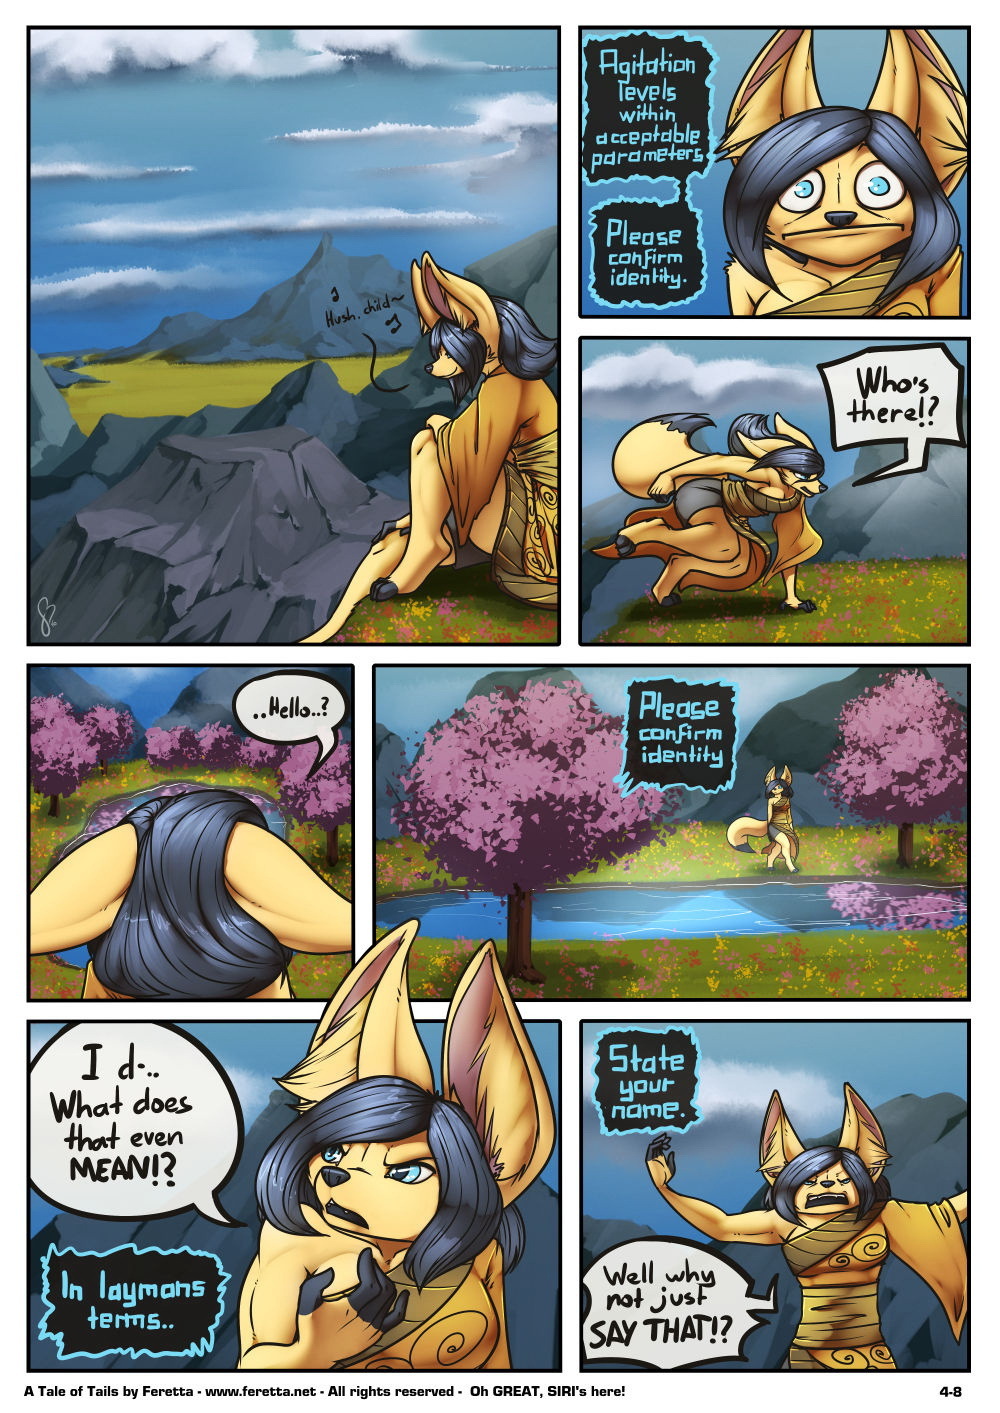 A Tale of Tails 4 - Matters of the mind - Page 8